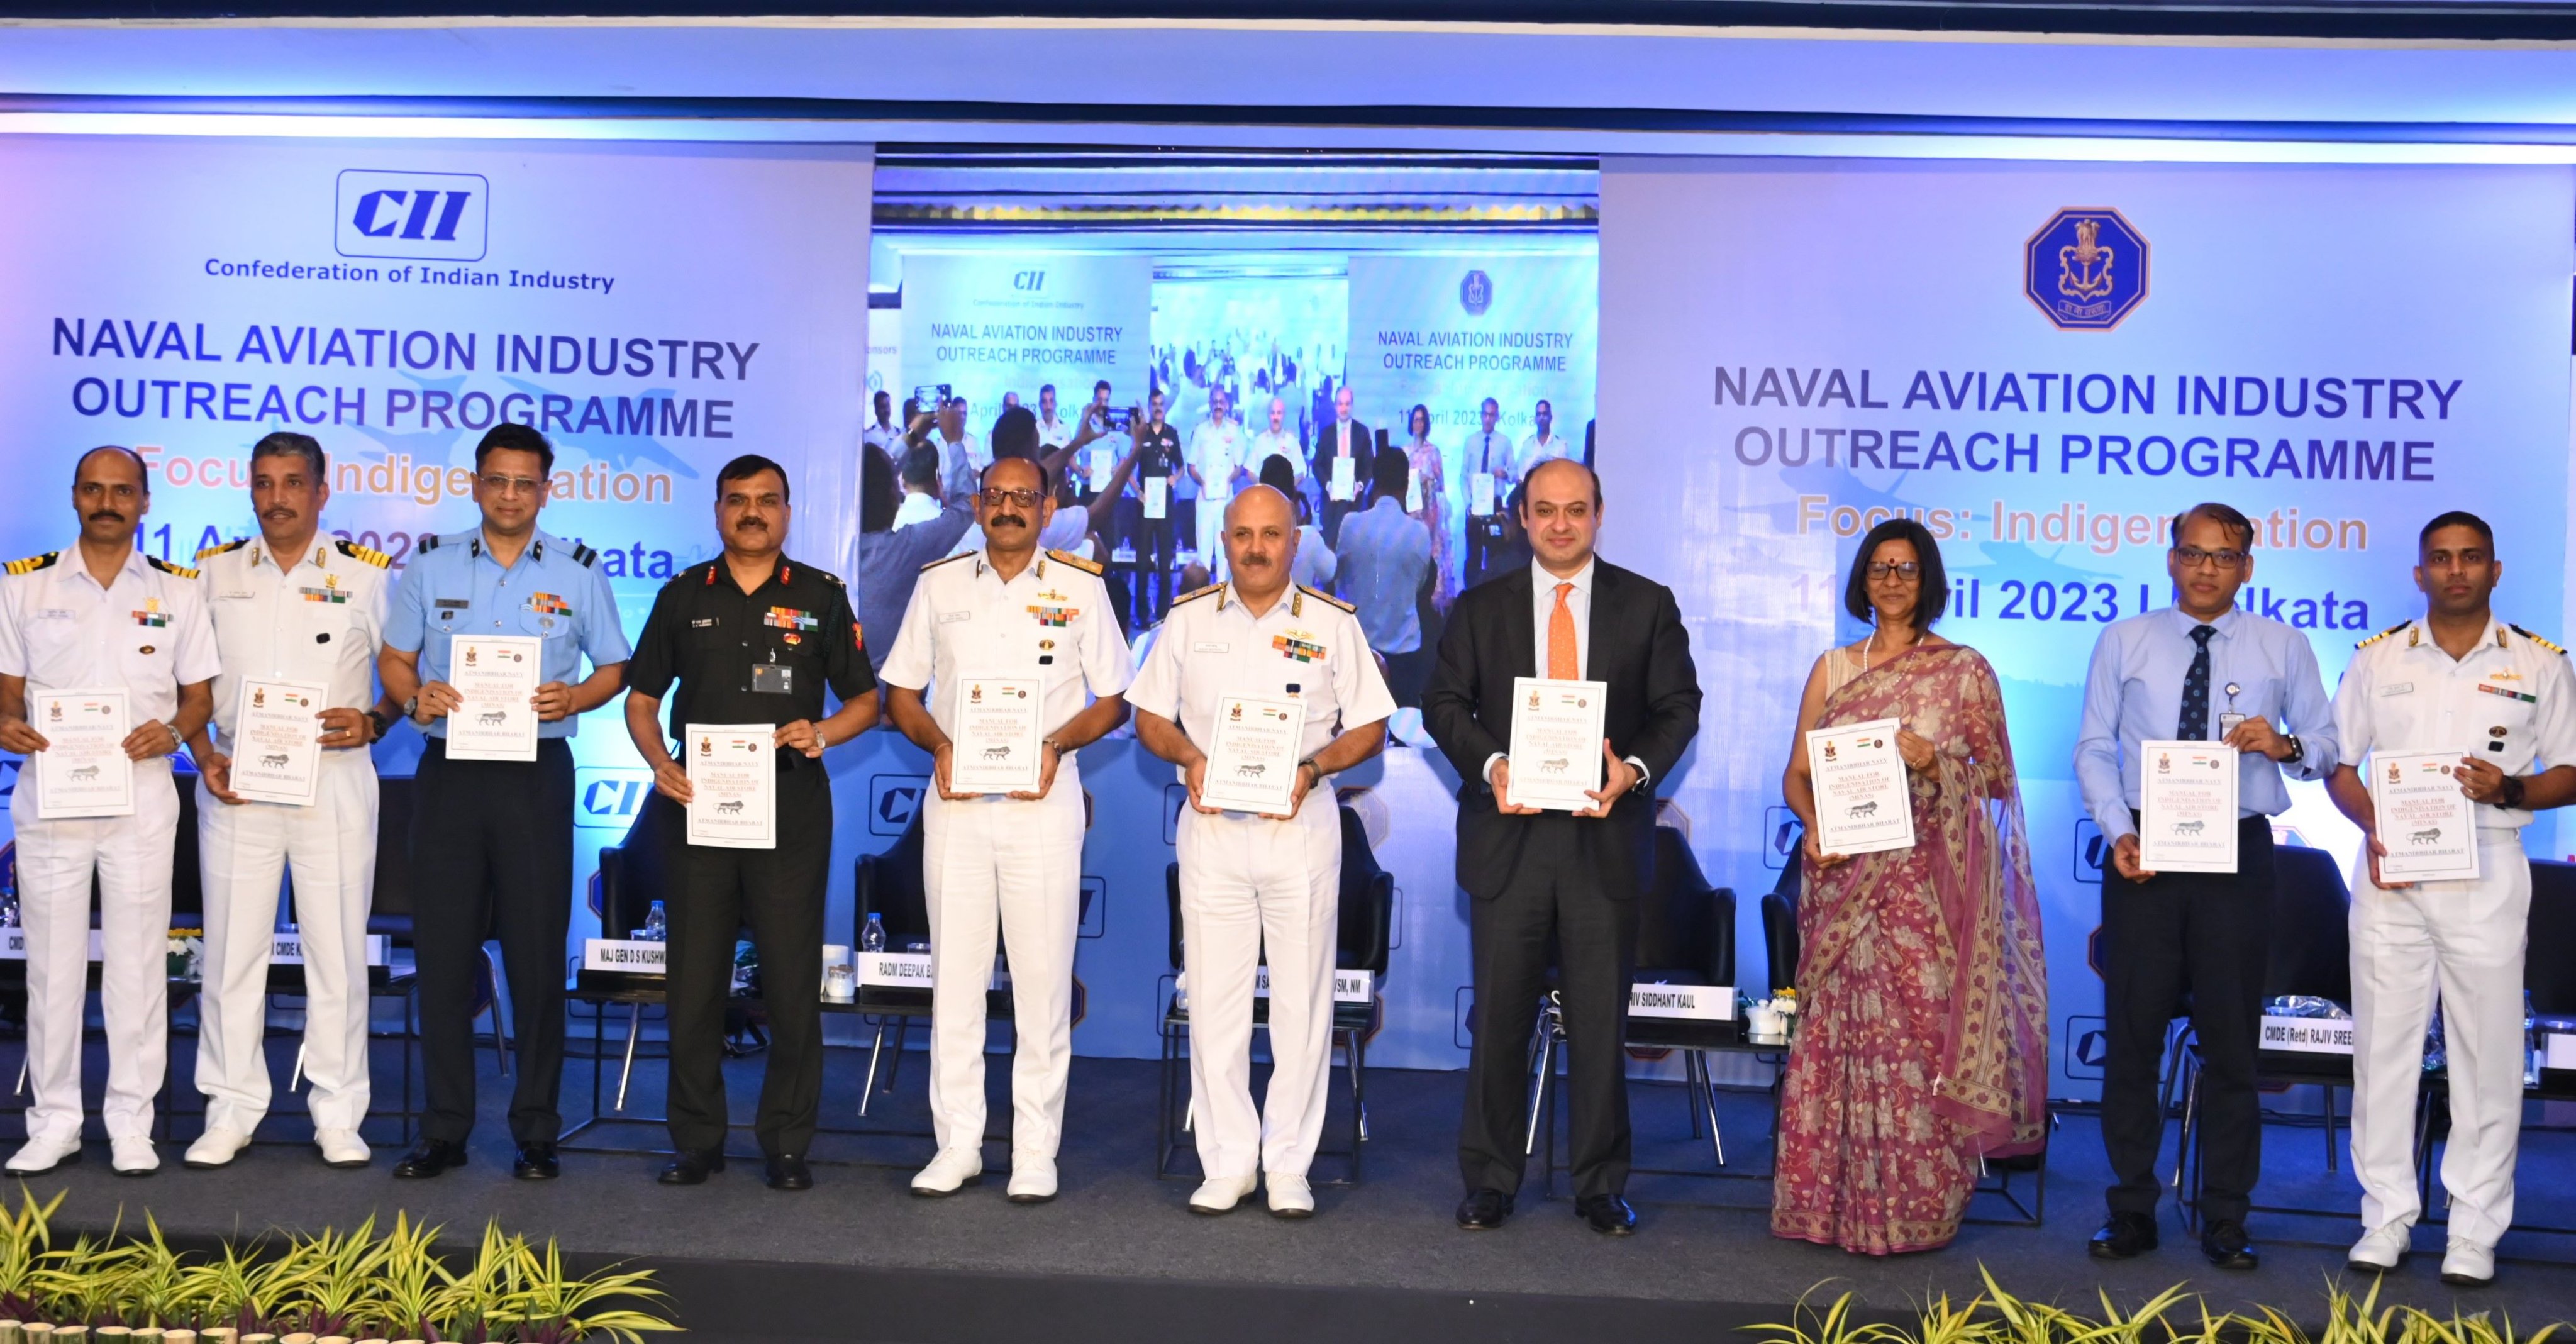 Indian Naval Aviation  Industry  Engaged  Over 100  Industry Partners  In Its  ‘Innovate-Integrate-Indigenise’  Outreach  Programme at  Kolkata